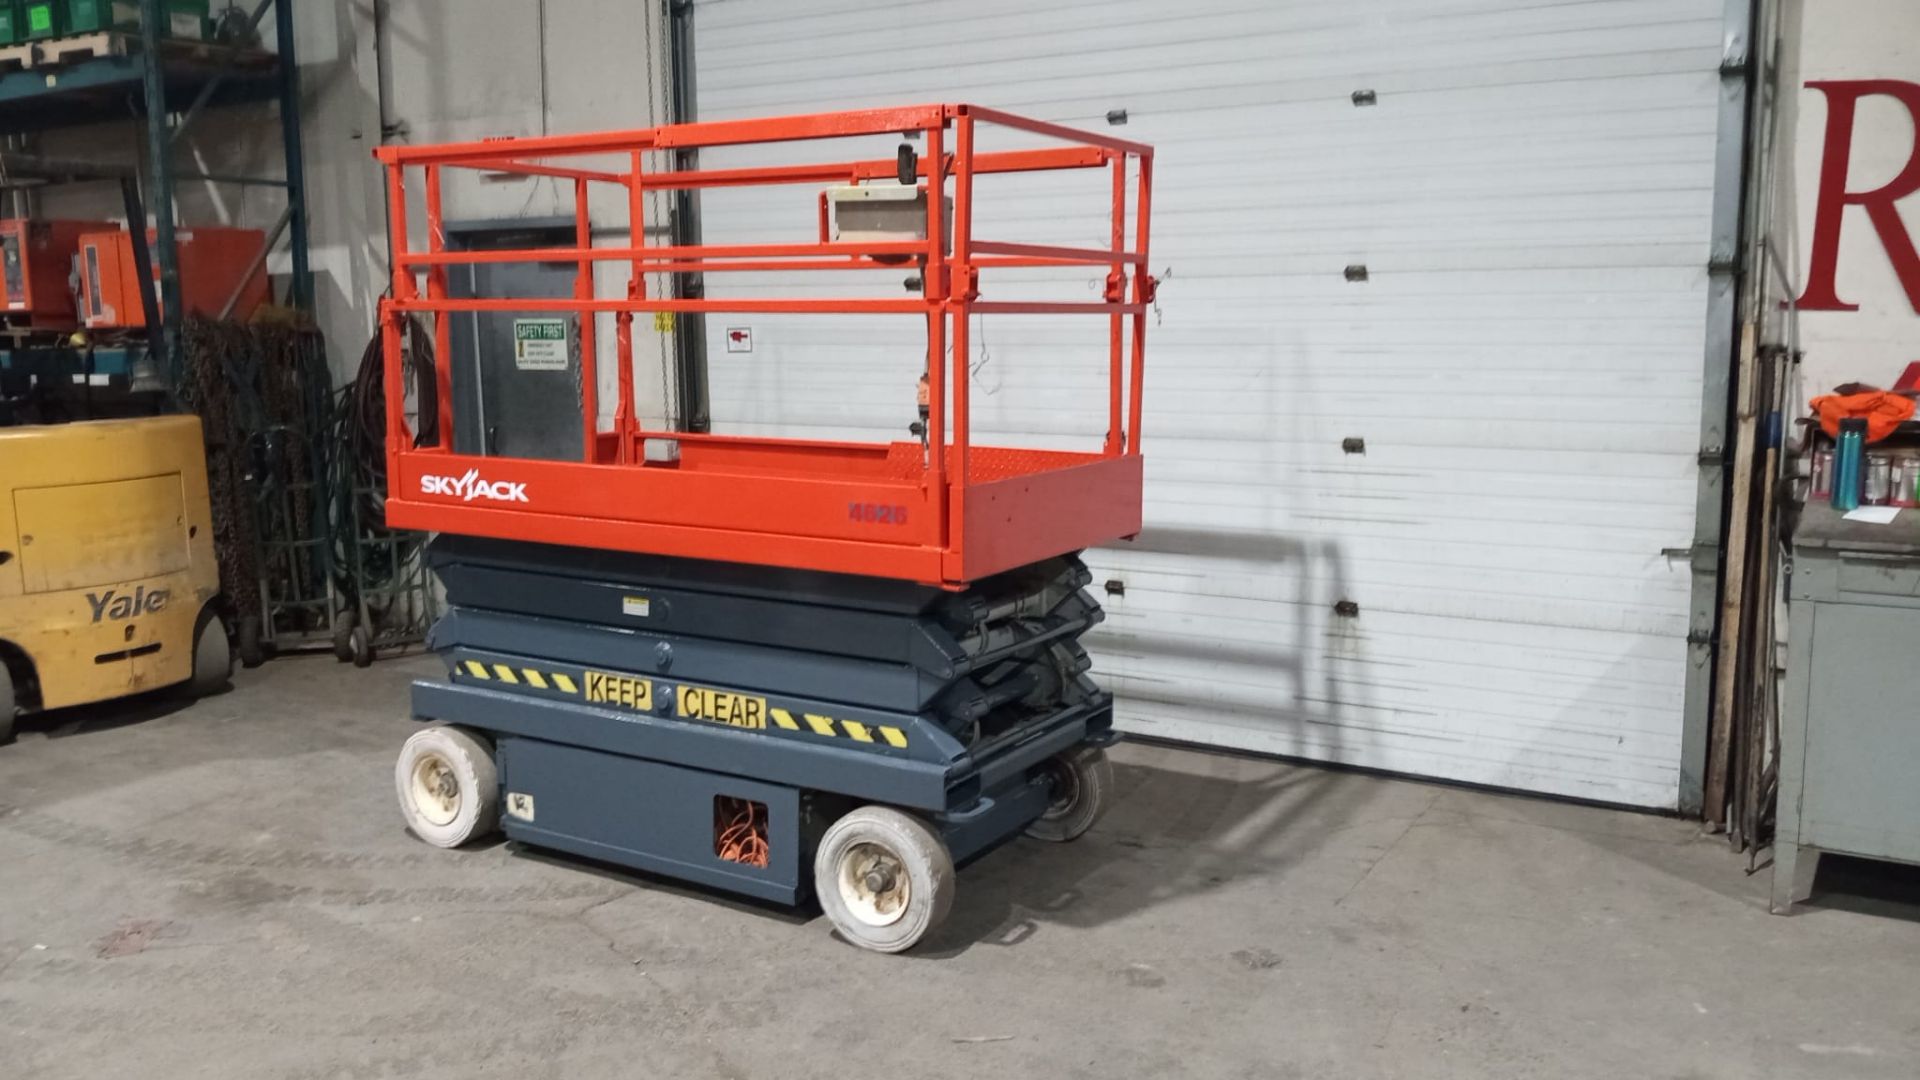 Skyjack III model 4626 Electric Motorized Scissor Lift with pendant controller with extendable - Image 2 of 2